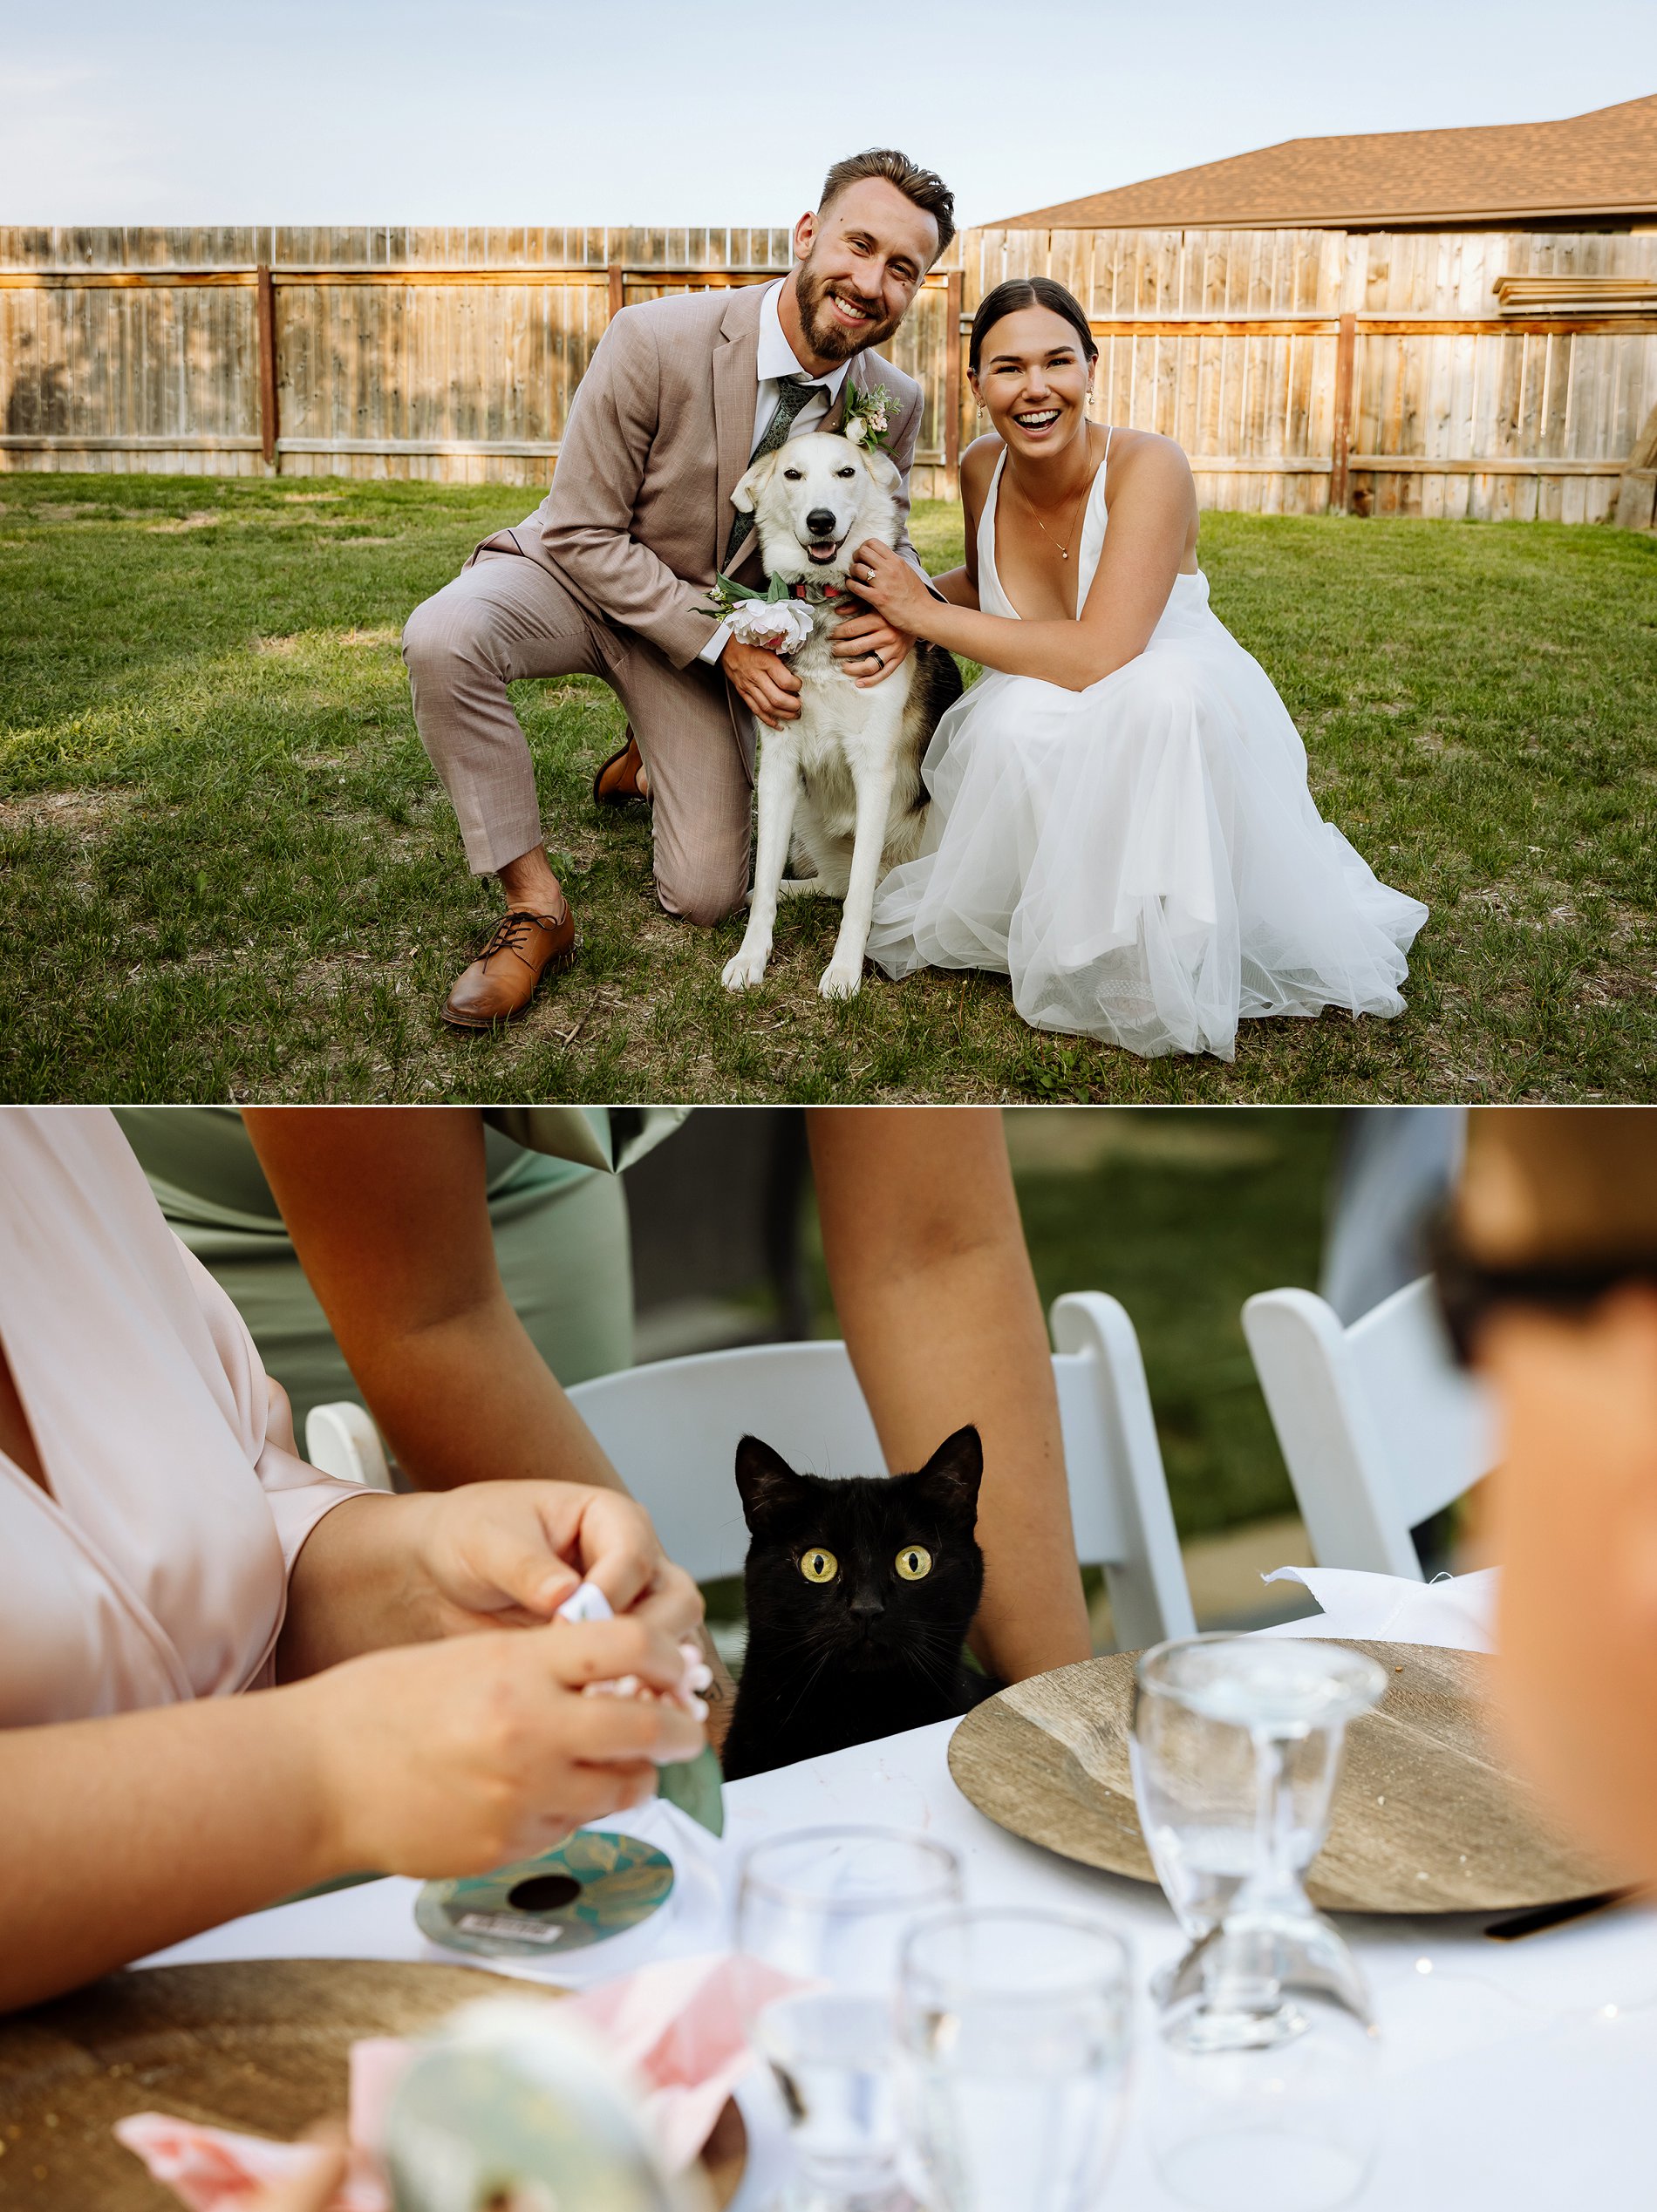 A bride and groom and their dog and cat at their backyard wedding reception.